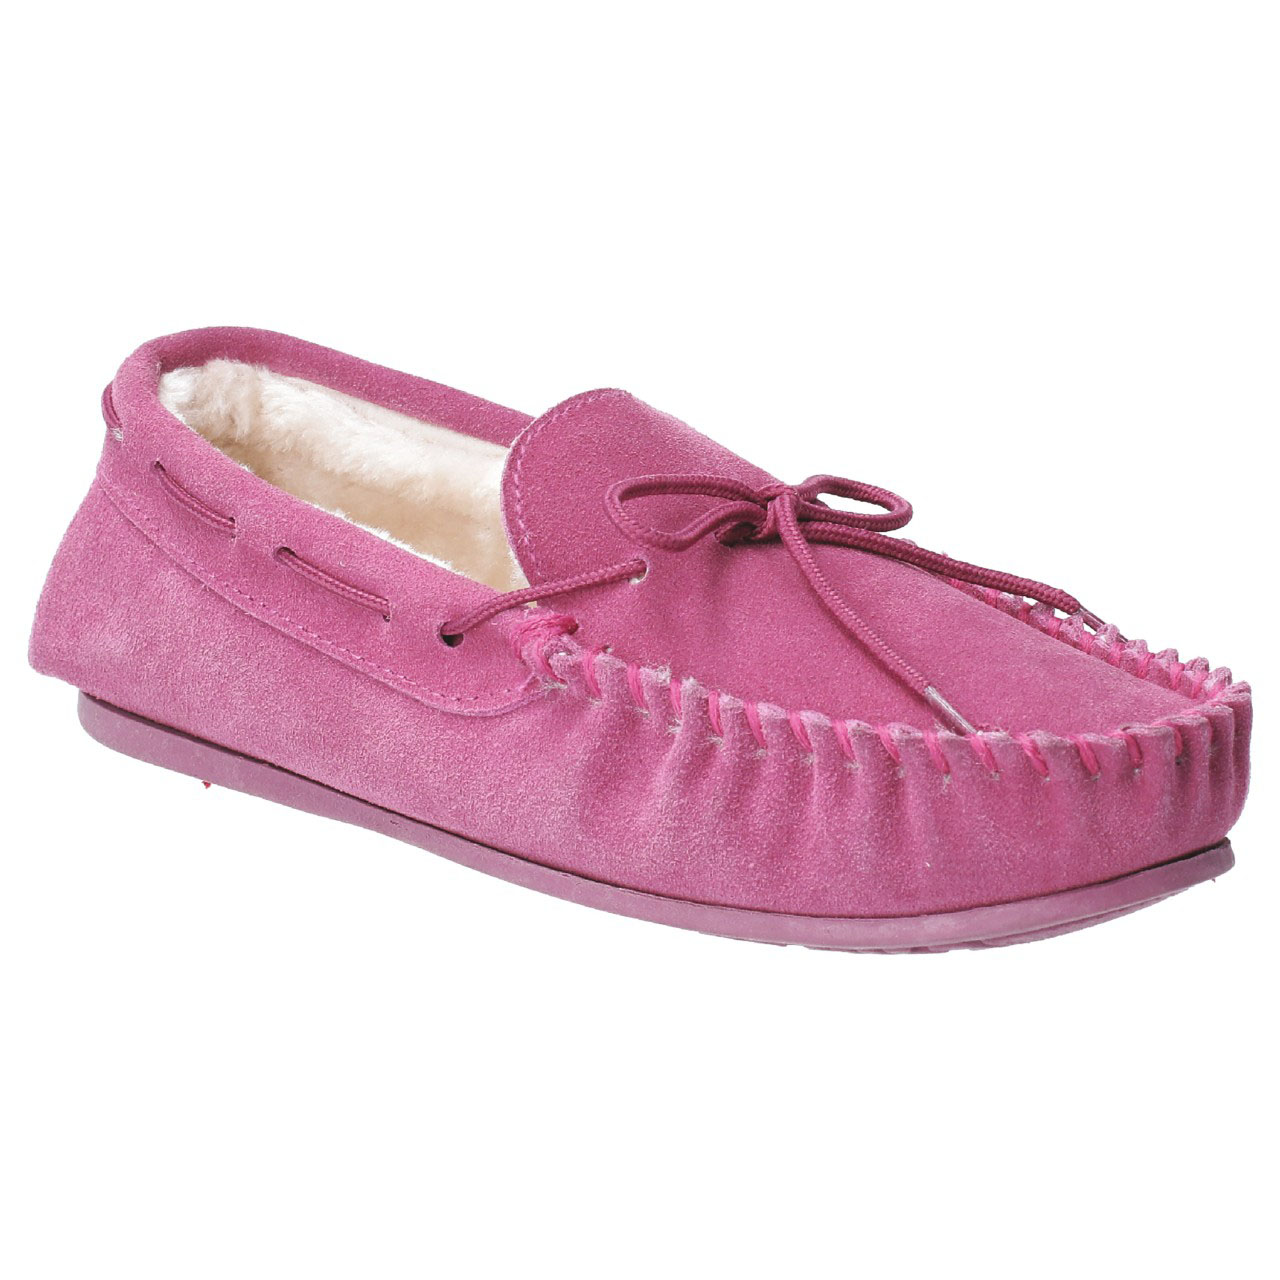 Grey | Ladies' Suede Hush Puppy Moccasin Slippers | Gift Discoveries